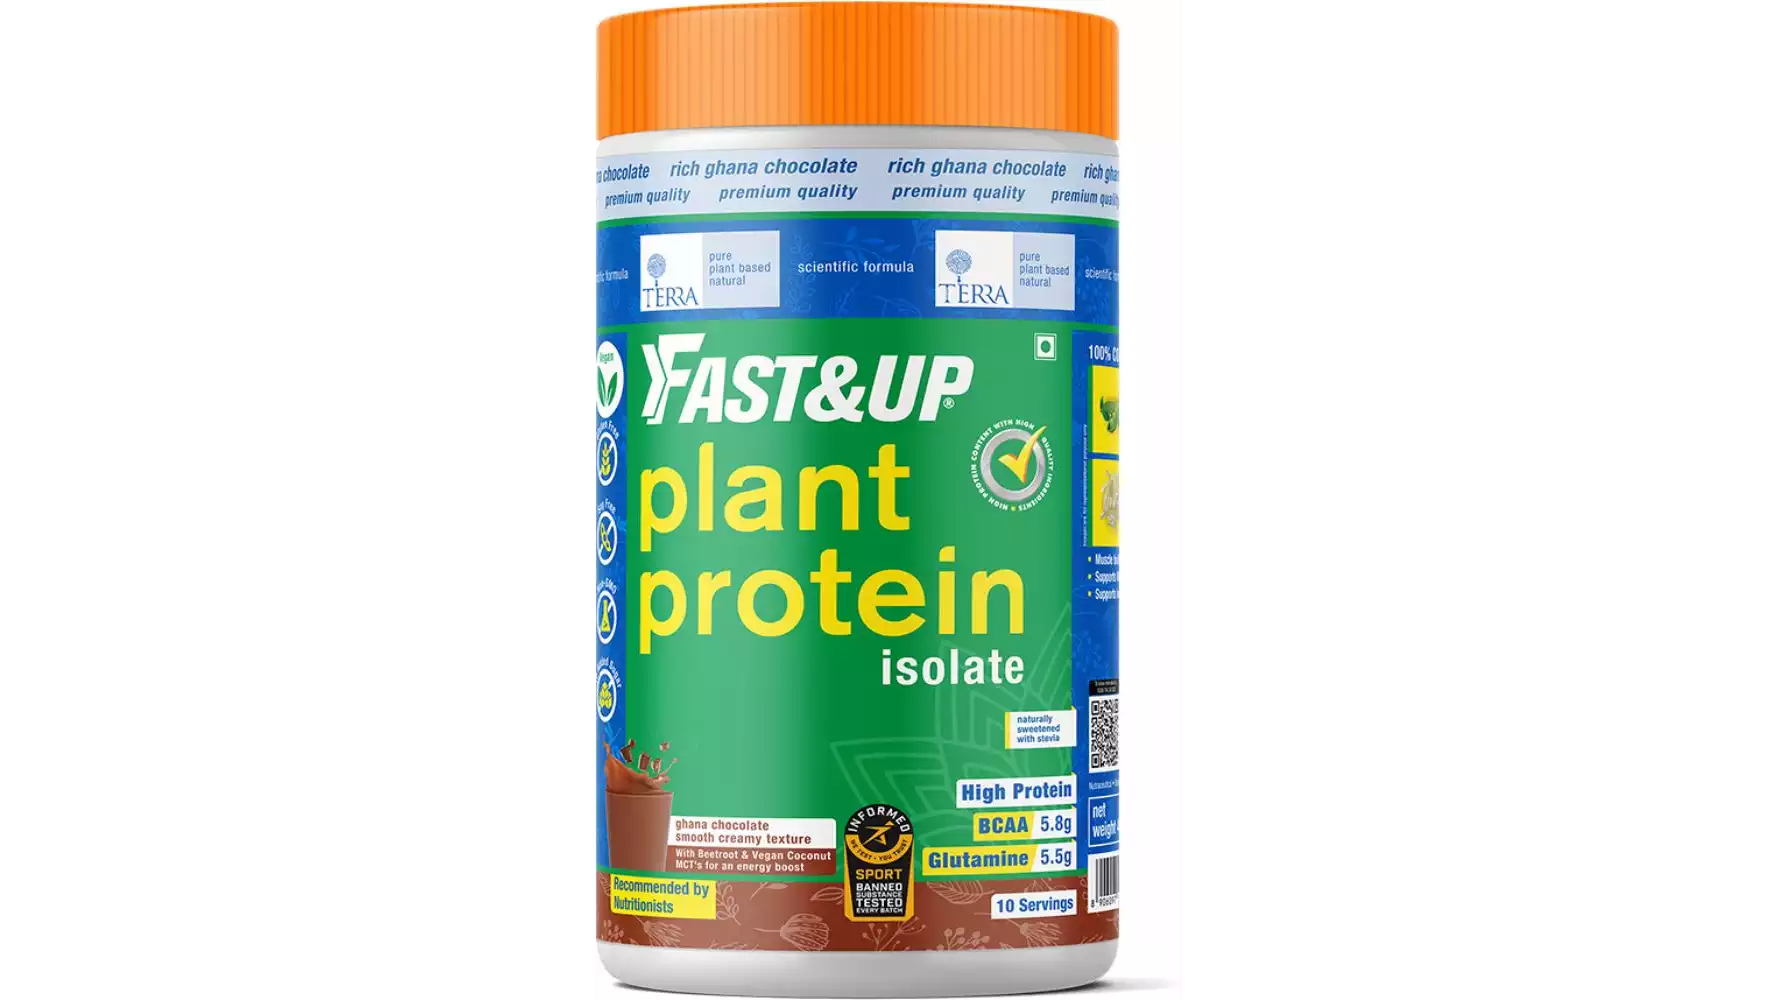 Fast&Up Plant Protein Isolate Blend Chocolate (450g)